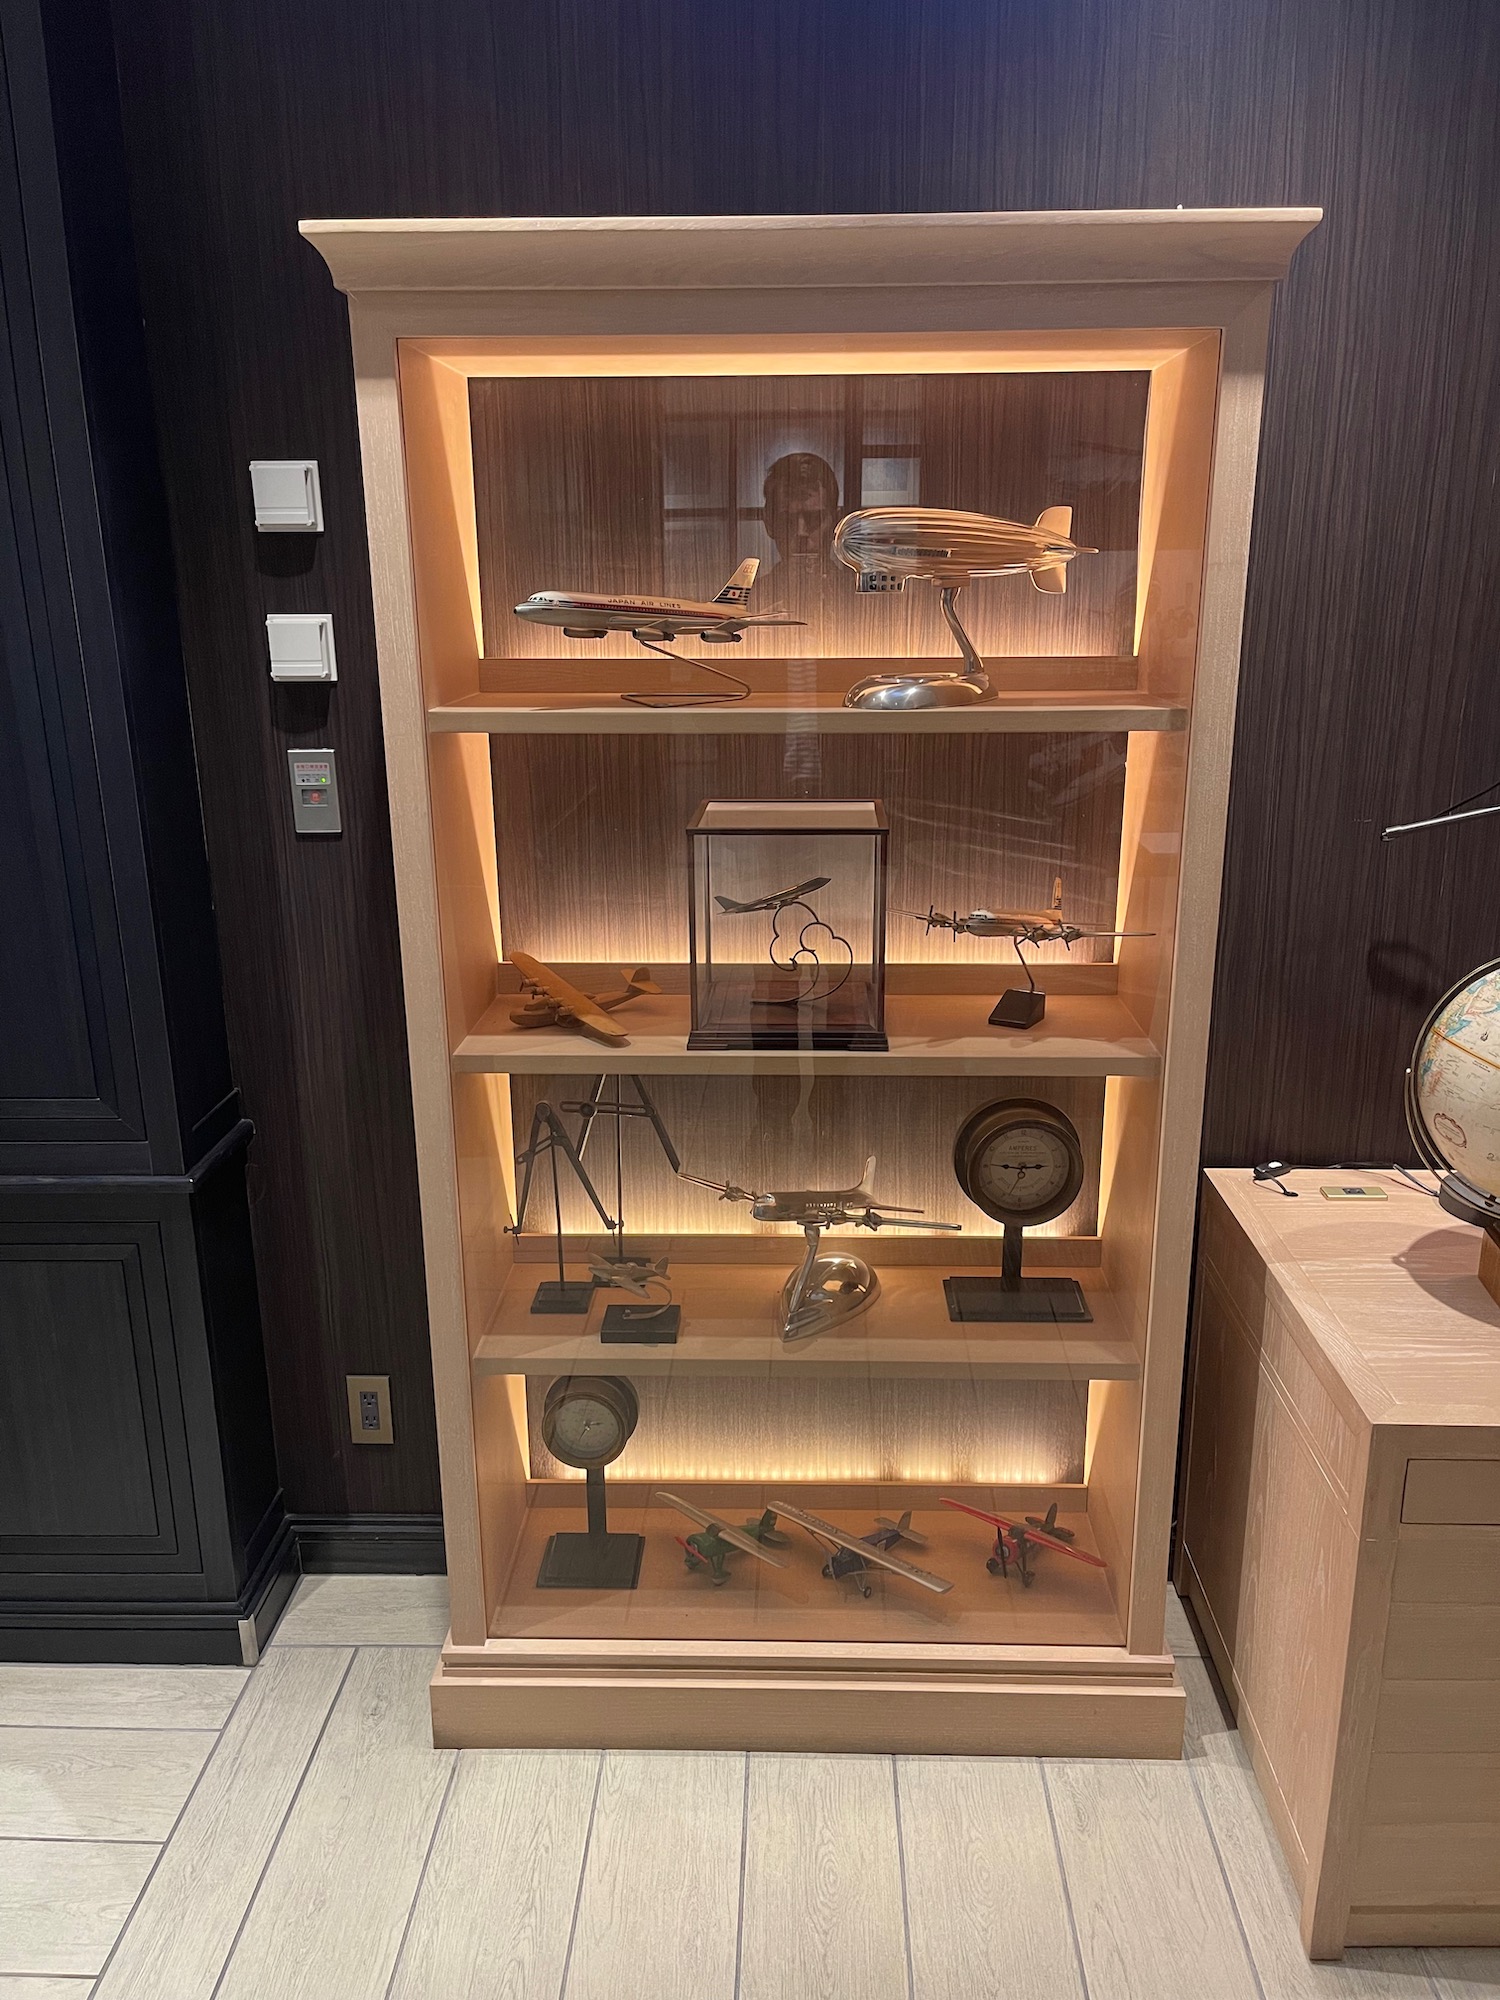 a display case with model airplanes and other objects